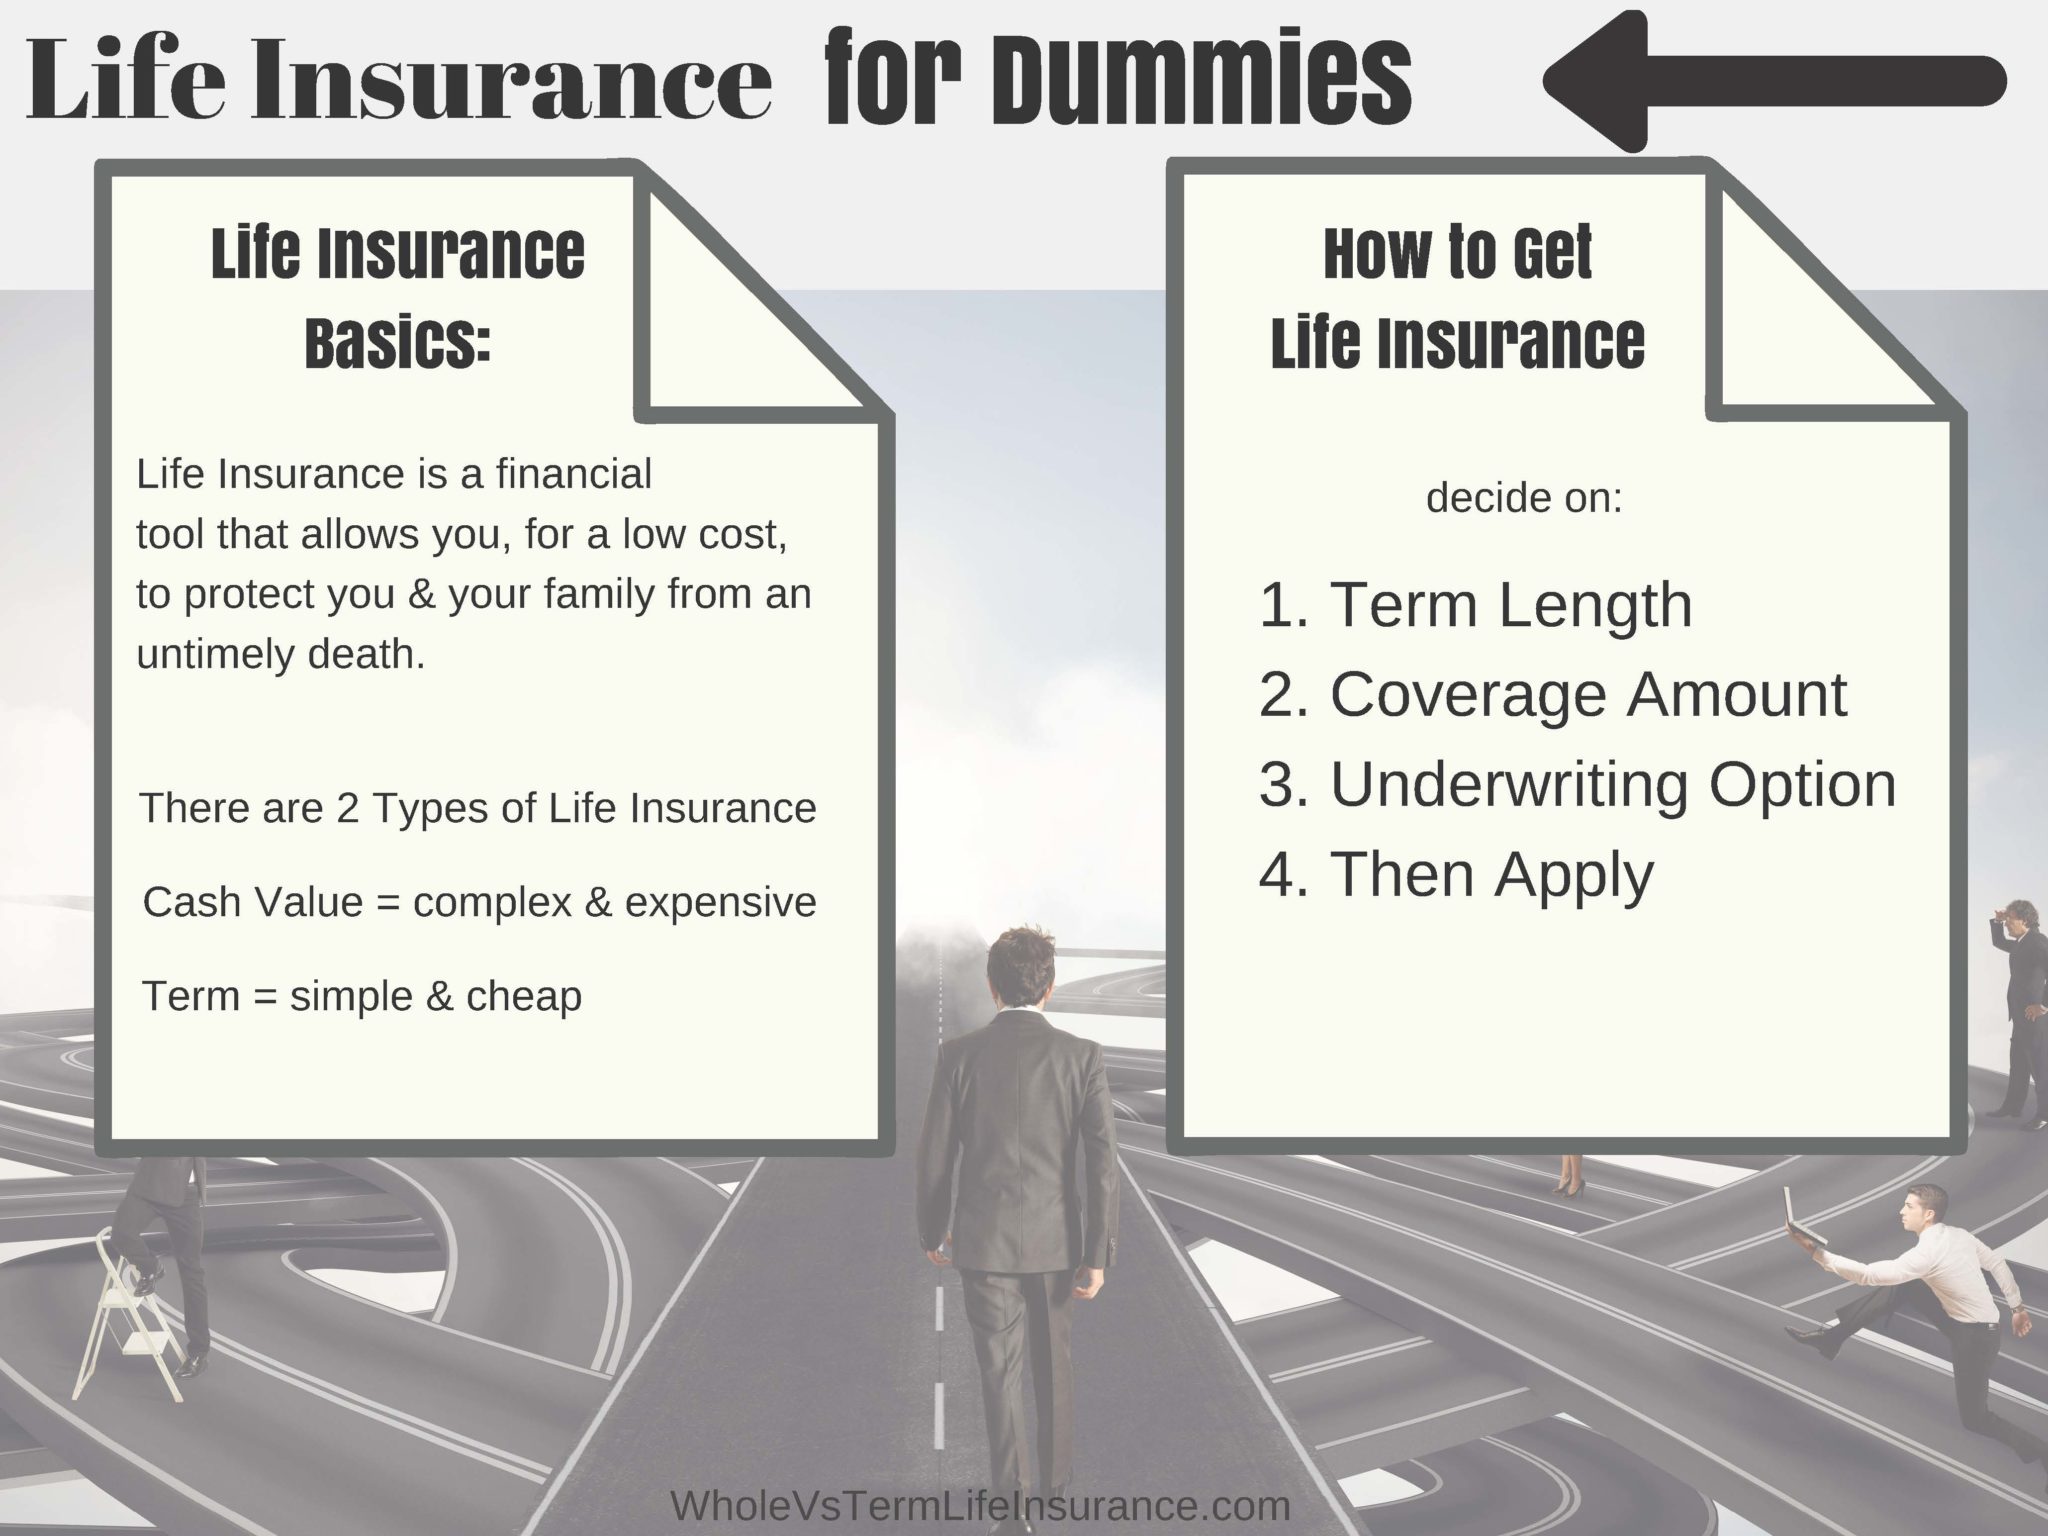 Life Insurance for dummies